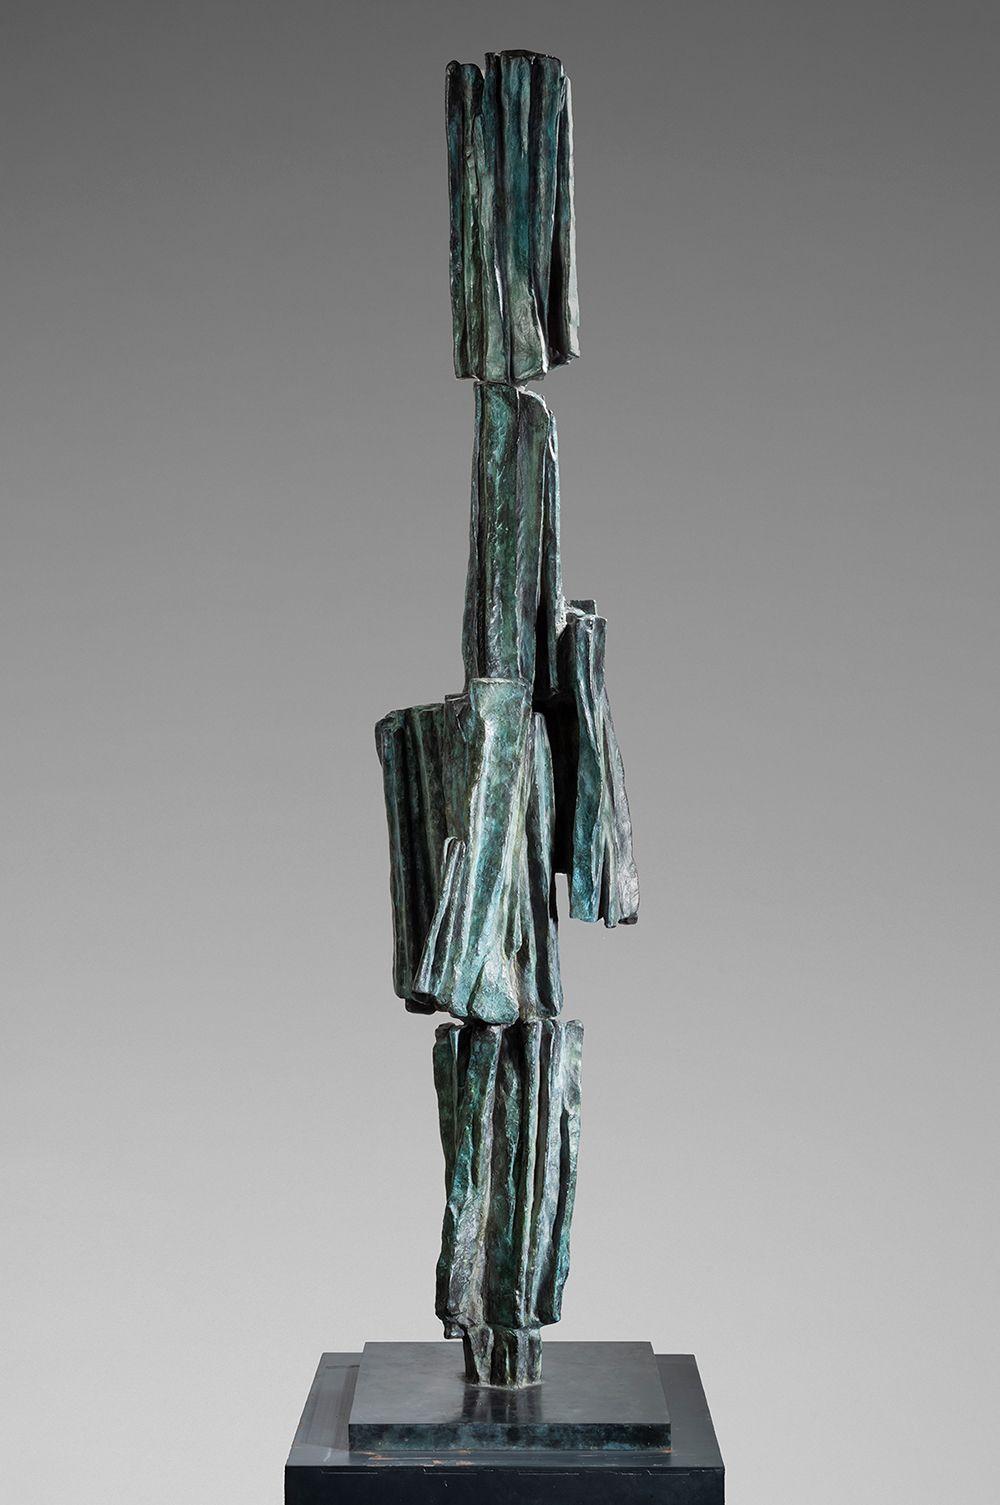 Martine Demal Abstract Sculpture - Signs & Writings No. 1 by M. Demal - large bronze sculpture, abstract, 6ft6-high